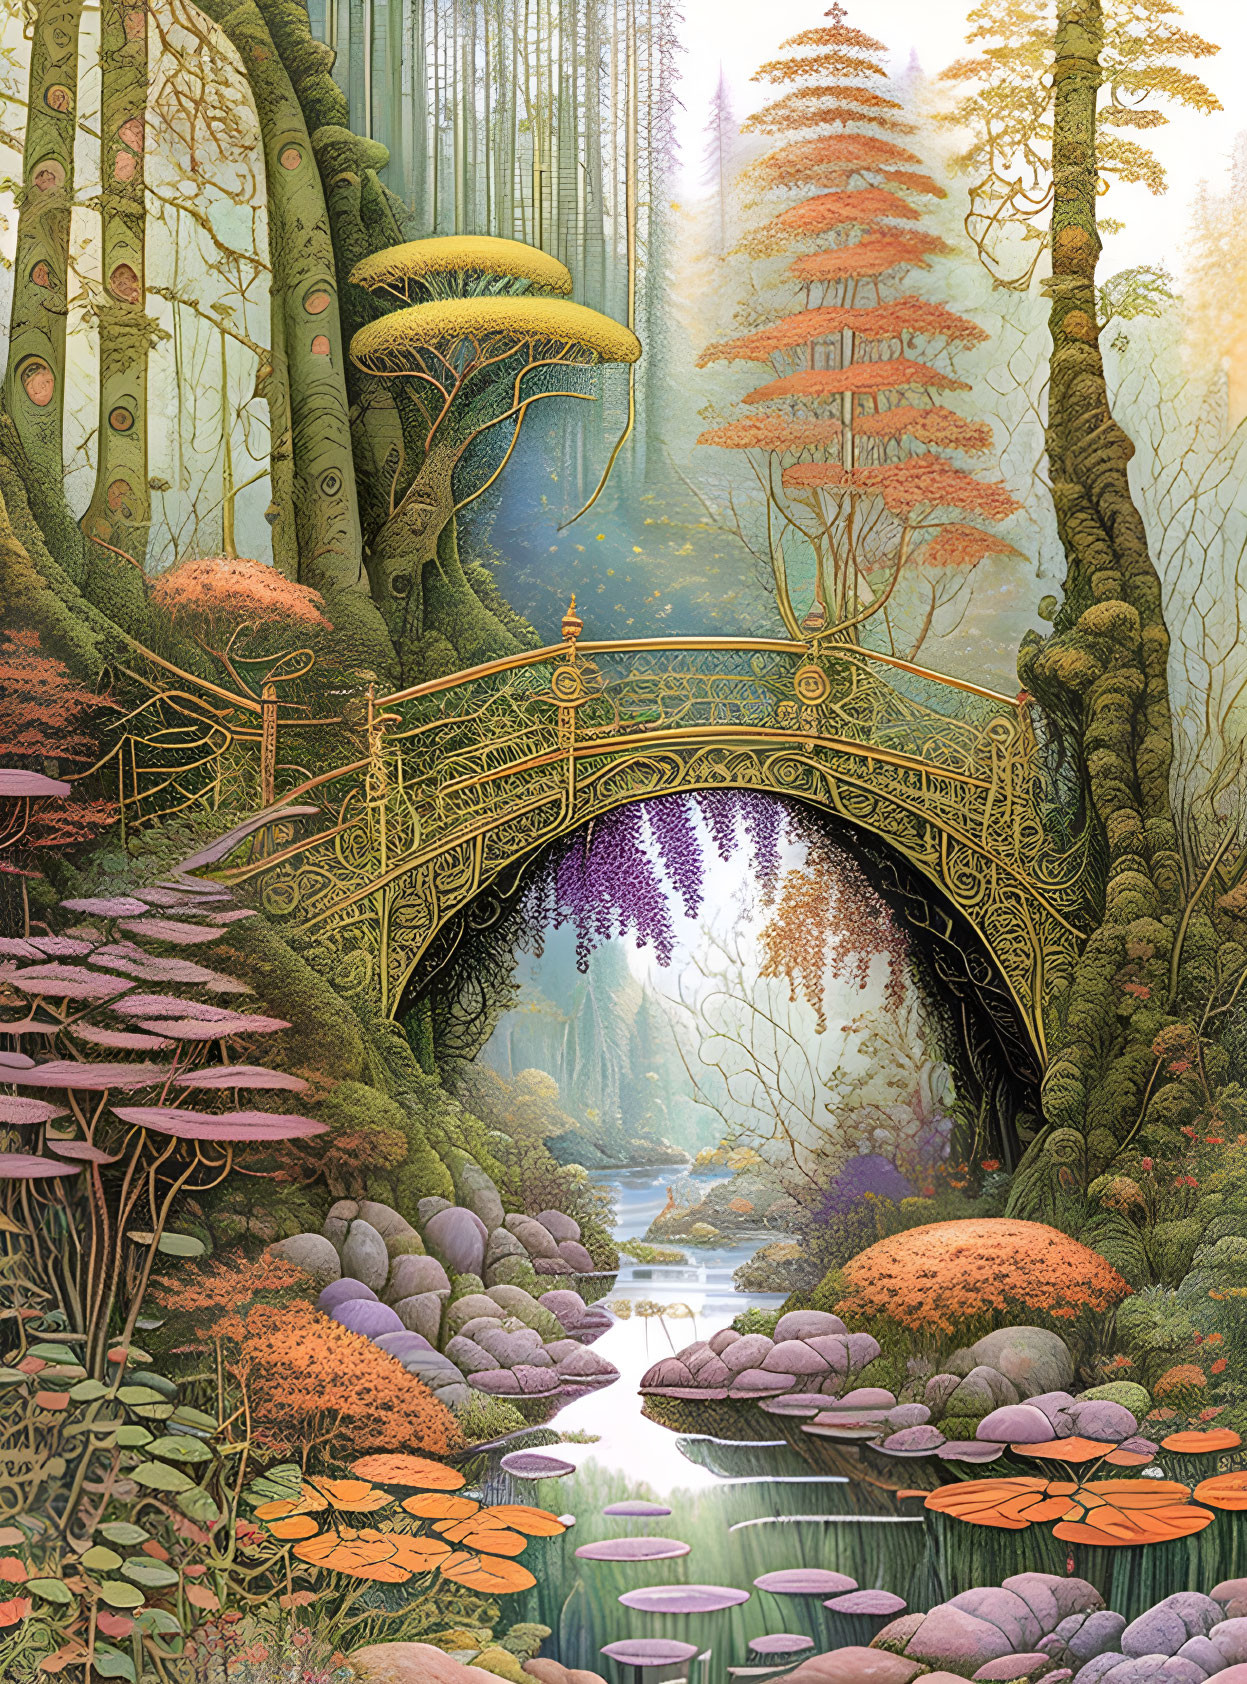 Fantasy forest with decorative bridge, towering trees, diverse flora, serene river